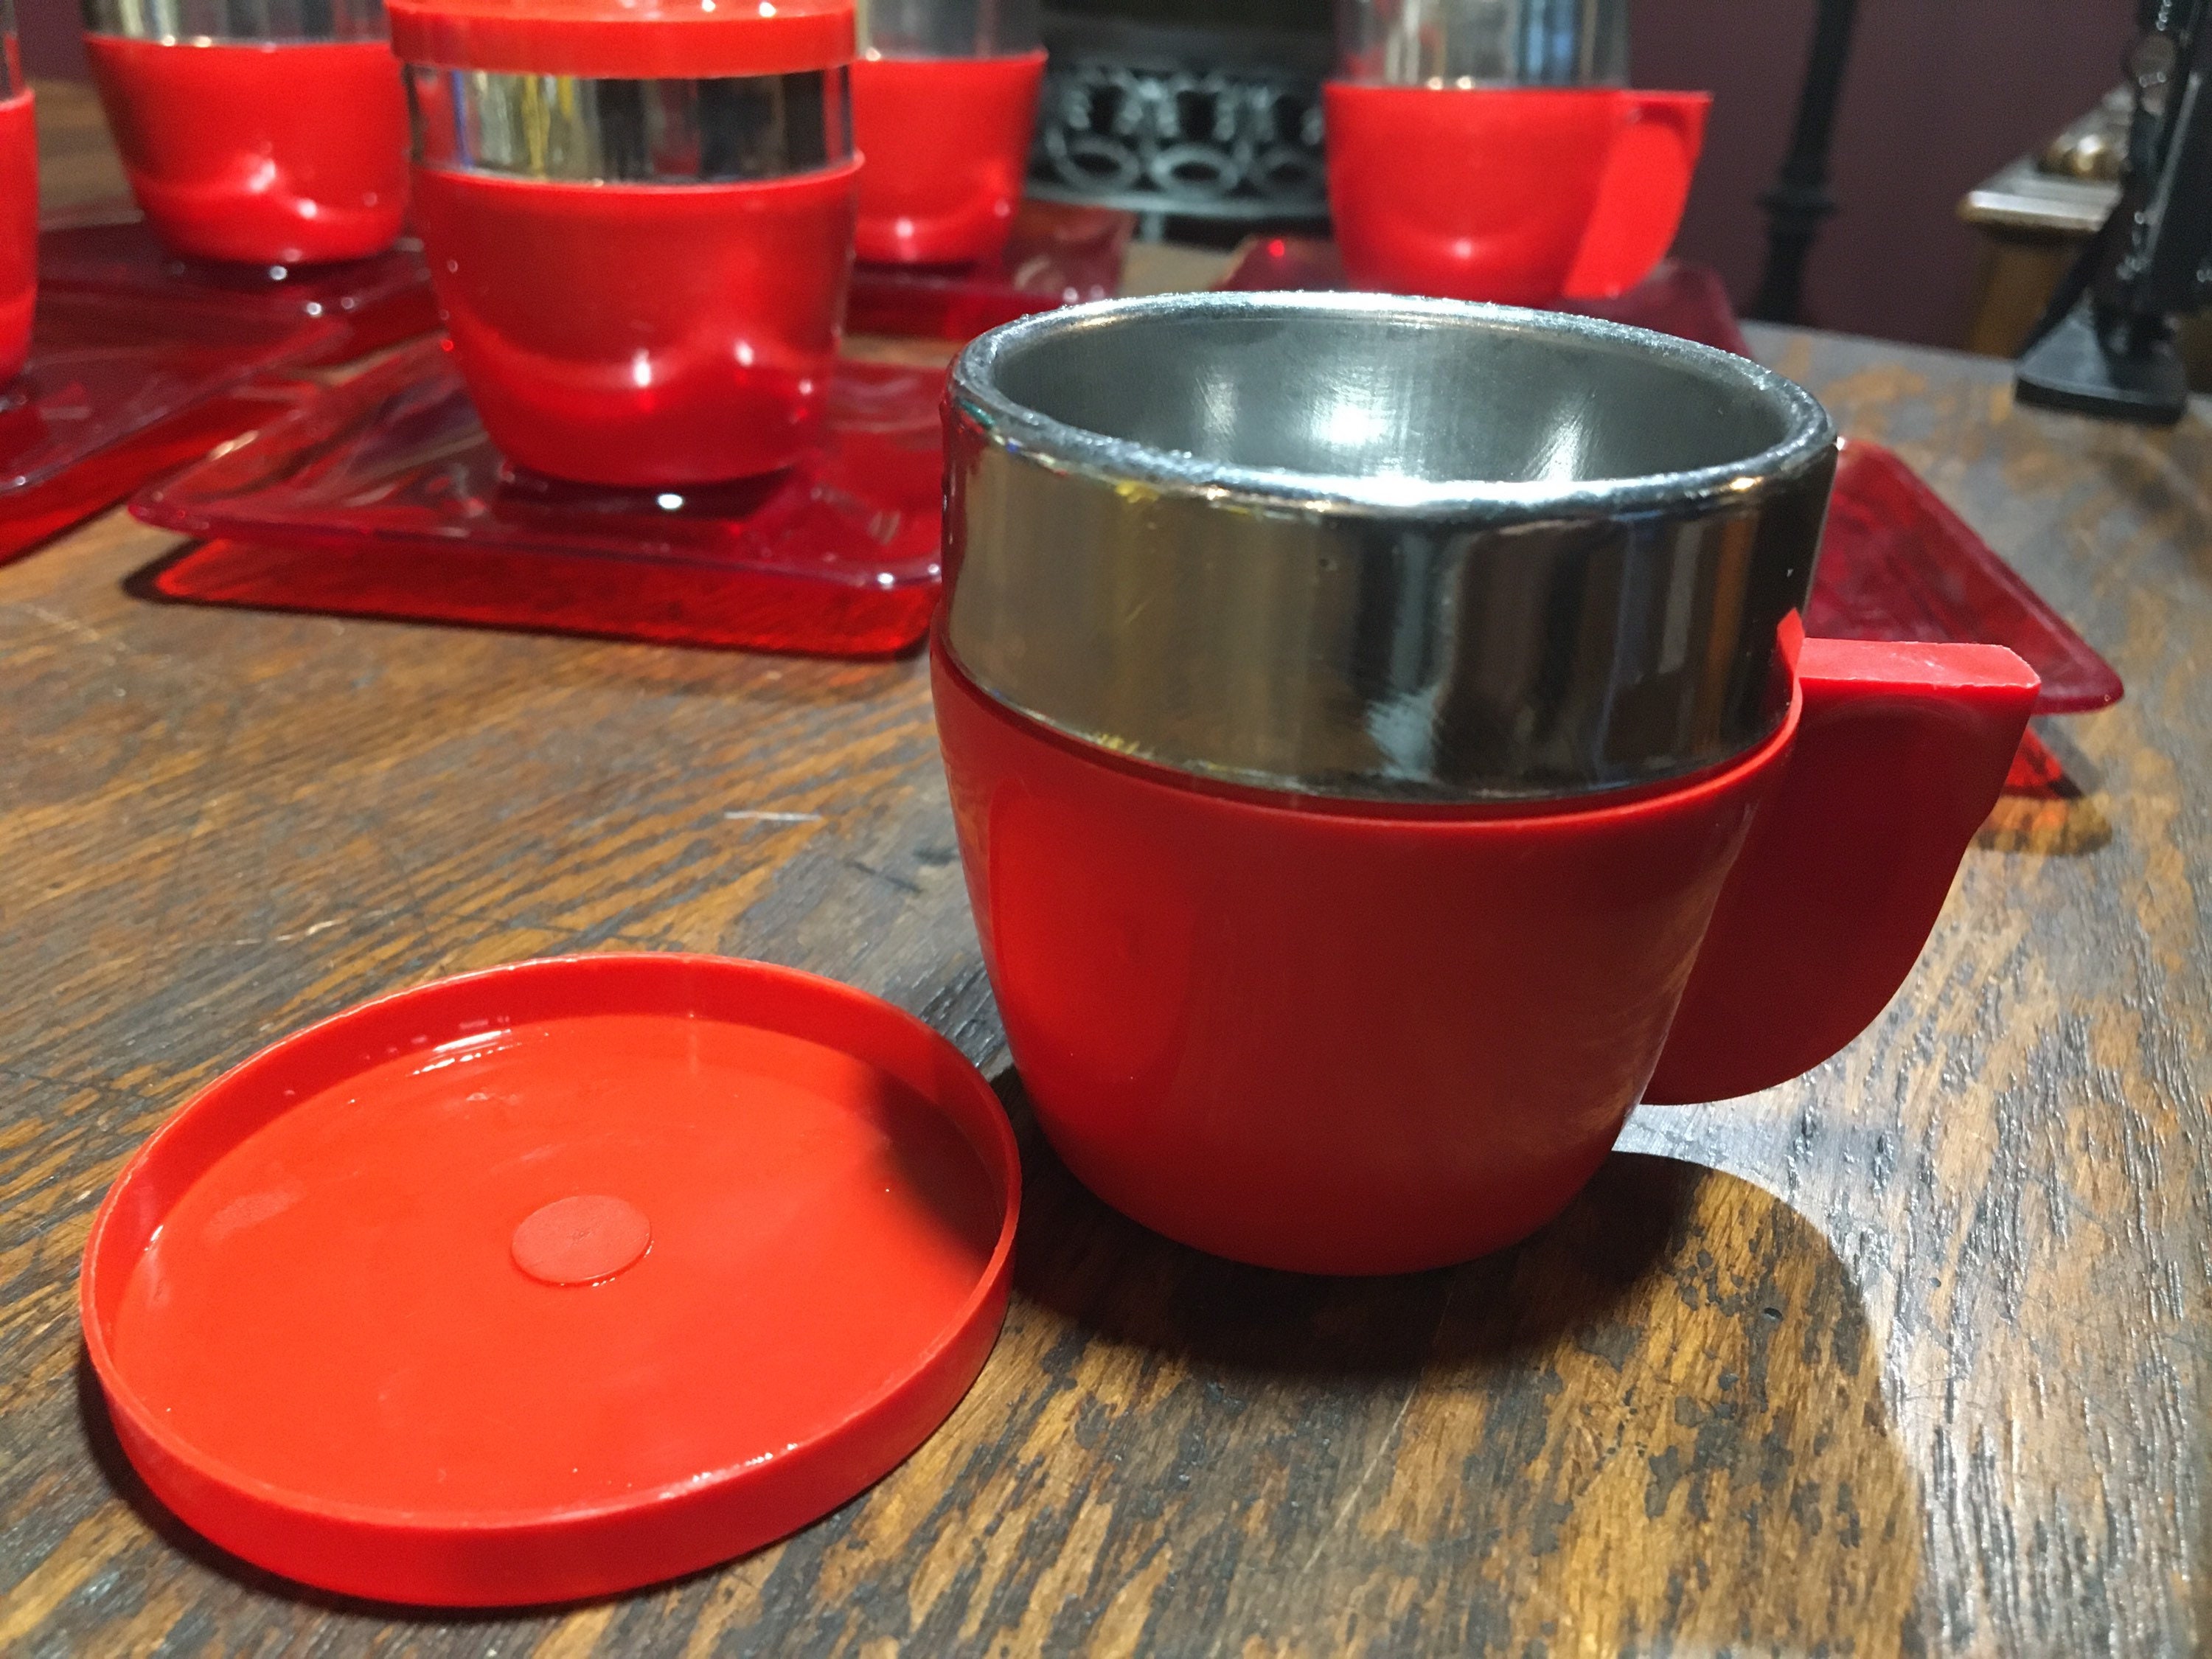 Espresso Cups and Saucers, Inoxriv, OMADA, Made in Italy, Stainless Steel,  Coffee Cups, 6 Funky Cups and Saucers, Plastic, Vintage 